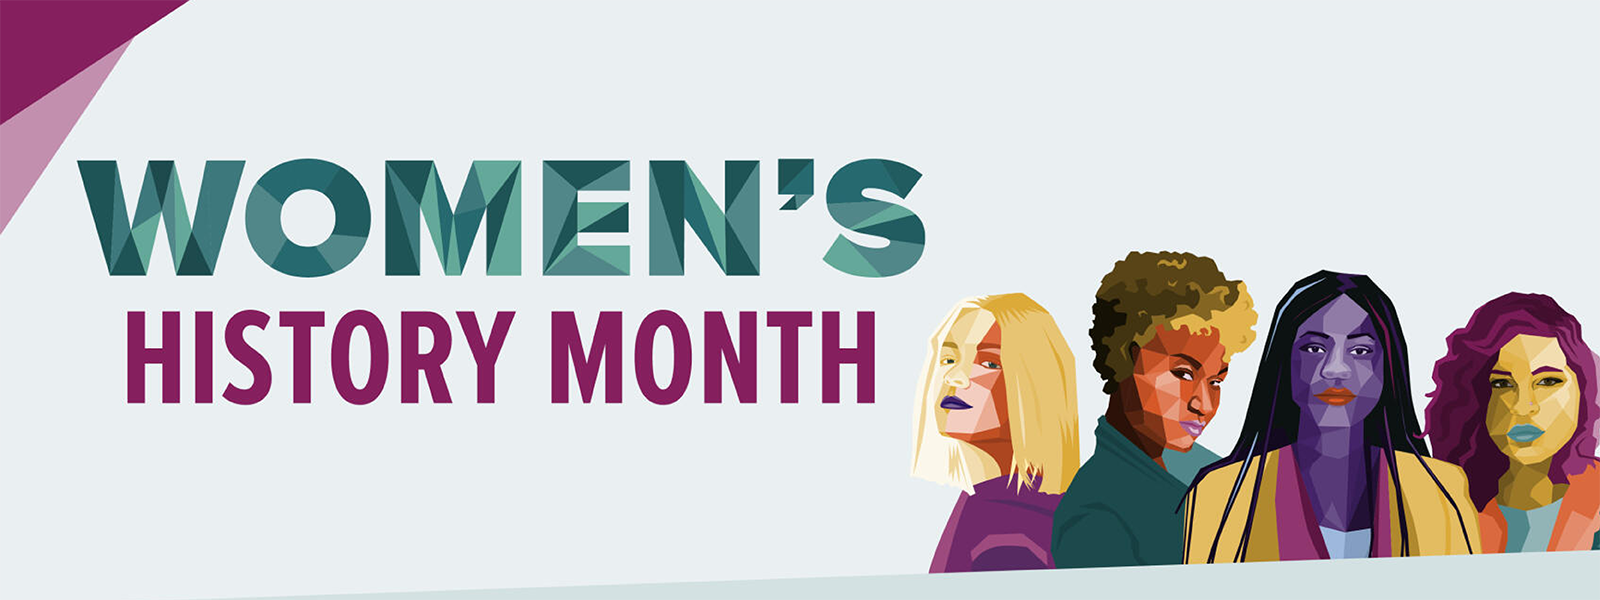 "Women's History Month" with illustrations of diverse women